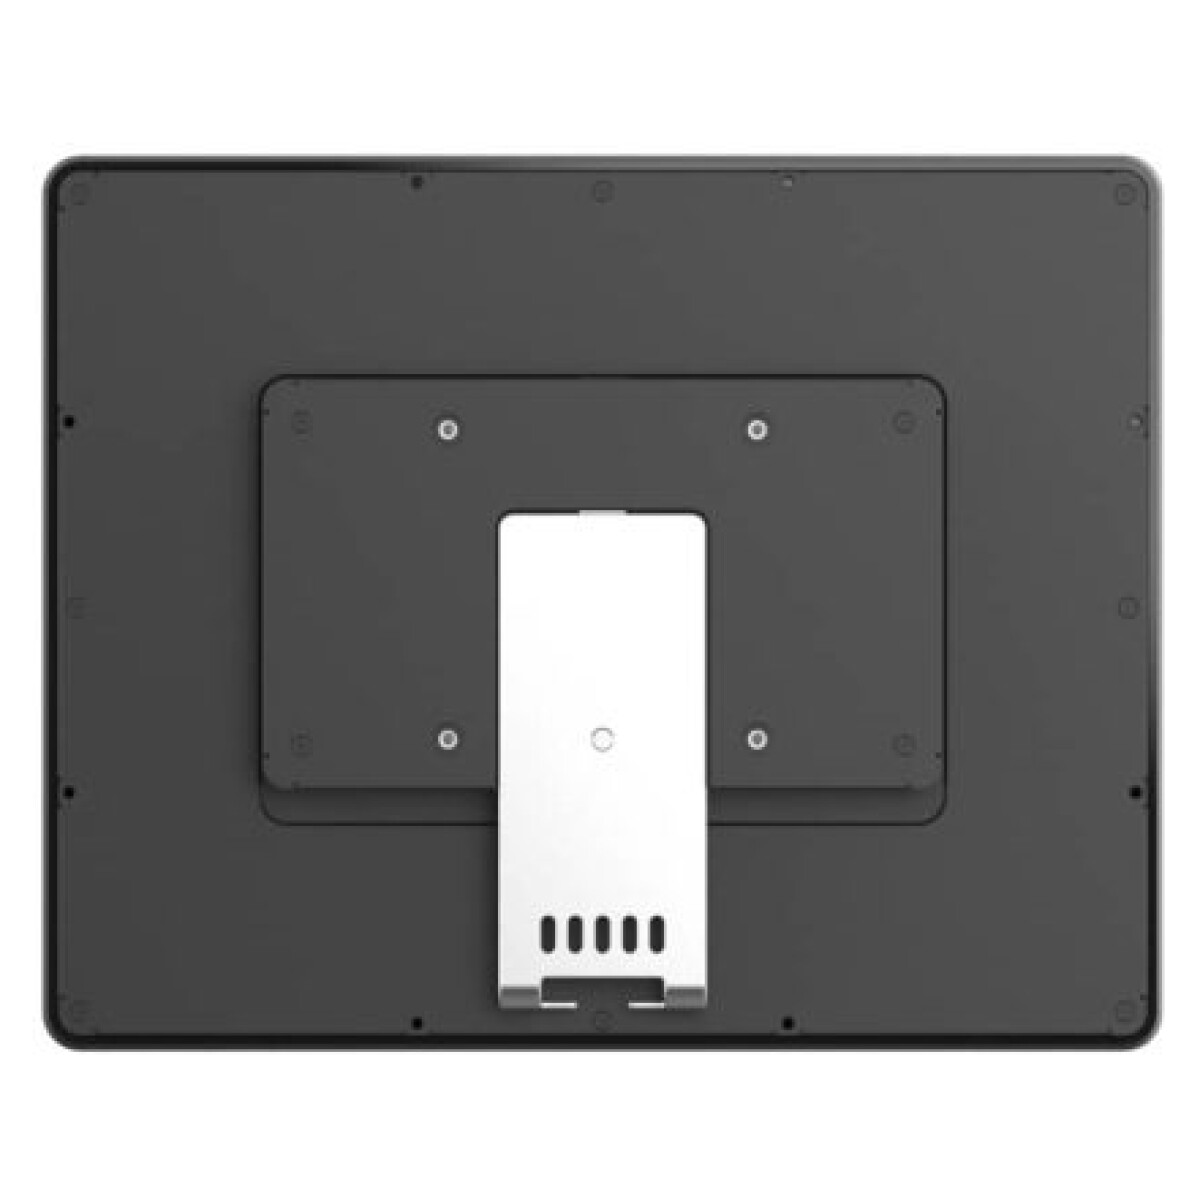 Microtouch OF-150P-B1 - 15in PCAP Open Frame